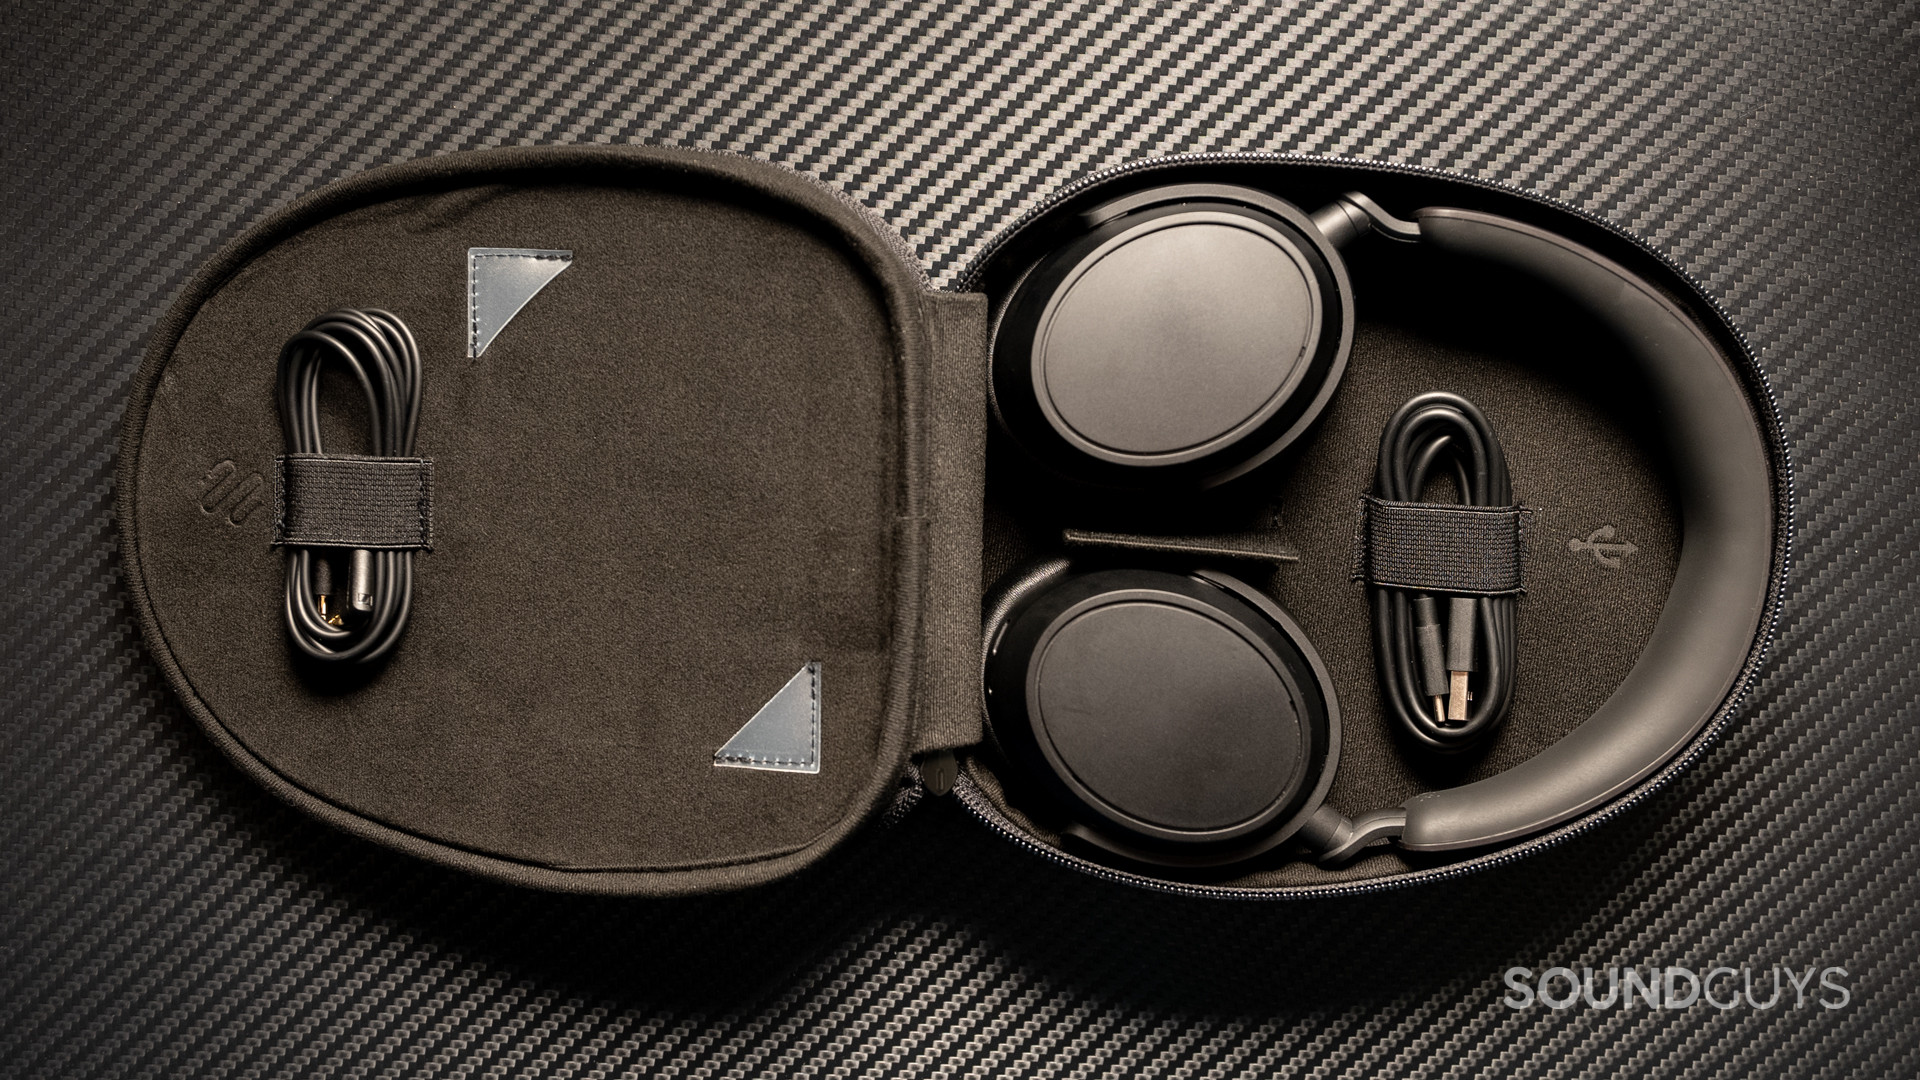 The inside of the Sennheiser ACCENTUM Plus' carrying case